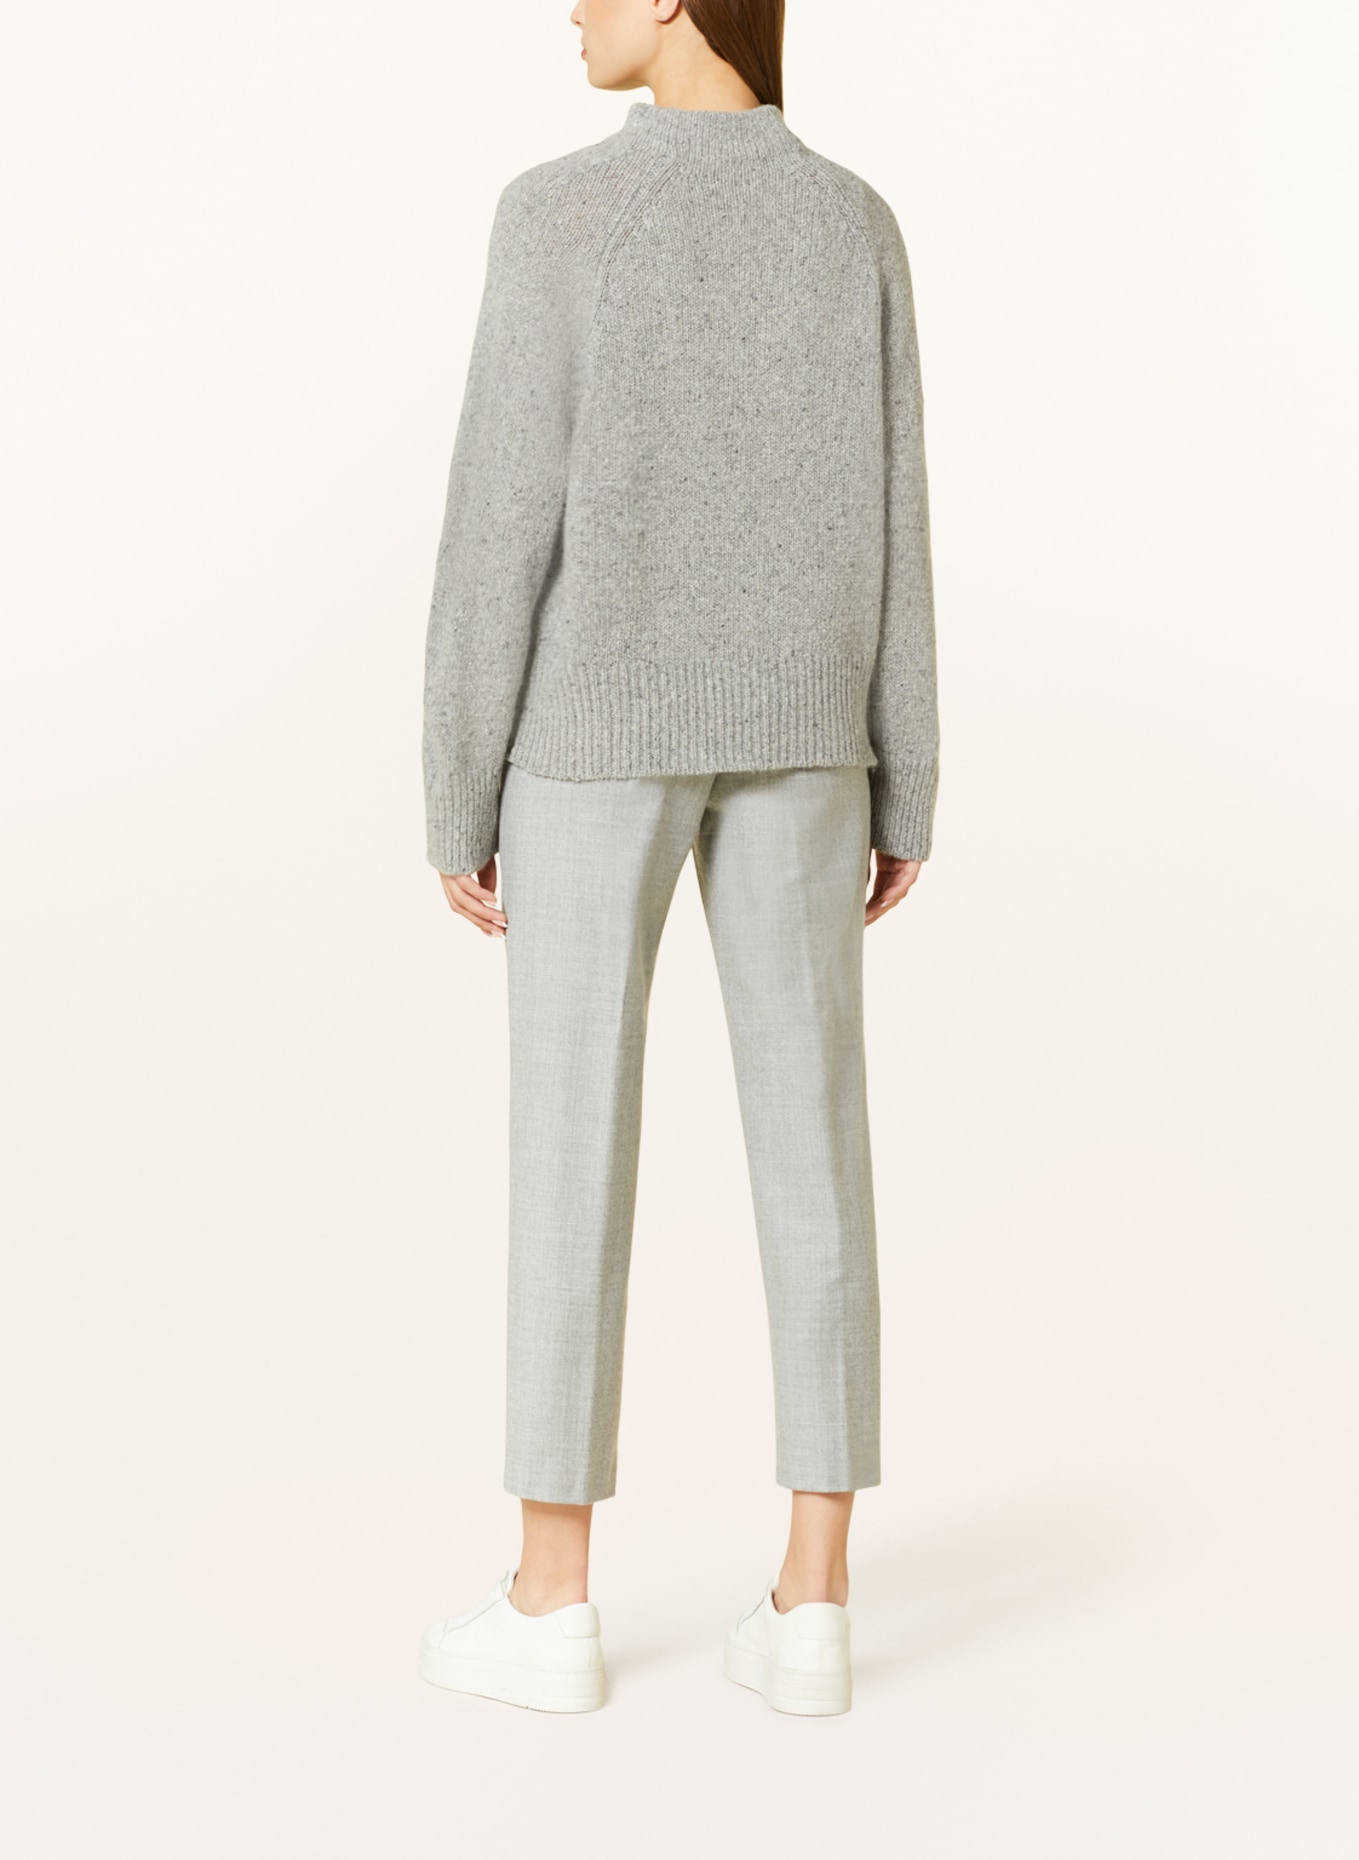 windsor. Cashmere sweater, Color: GRAY (Image 3)